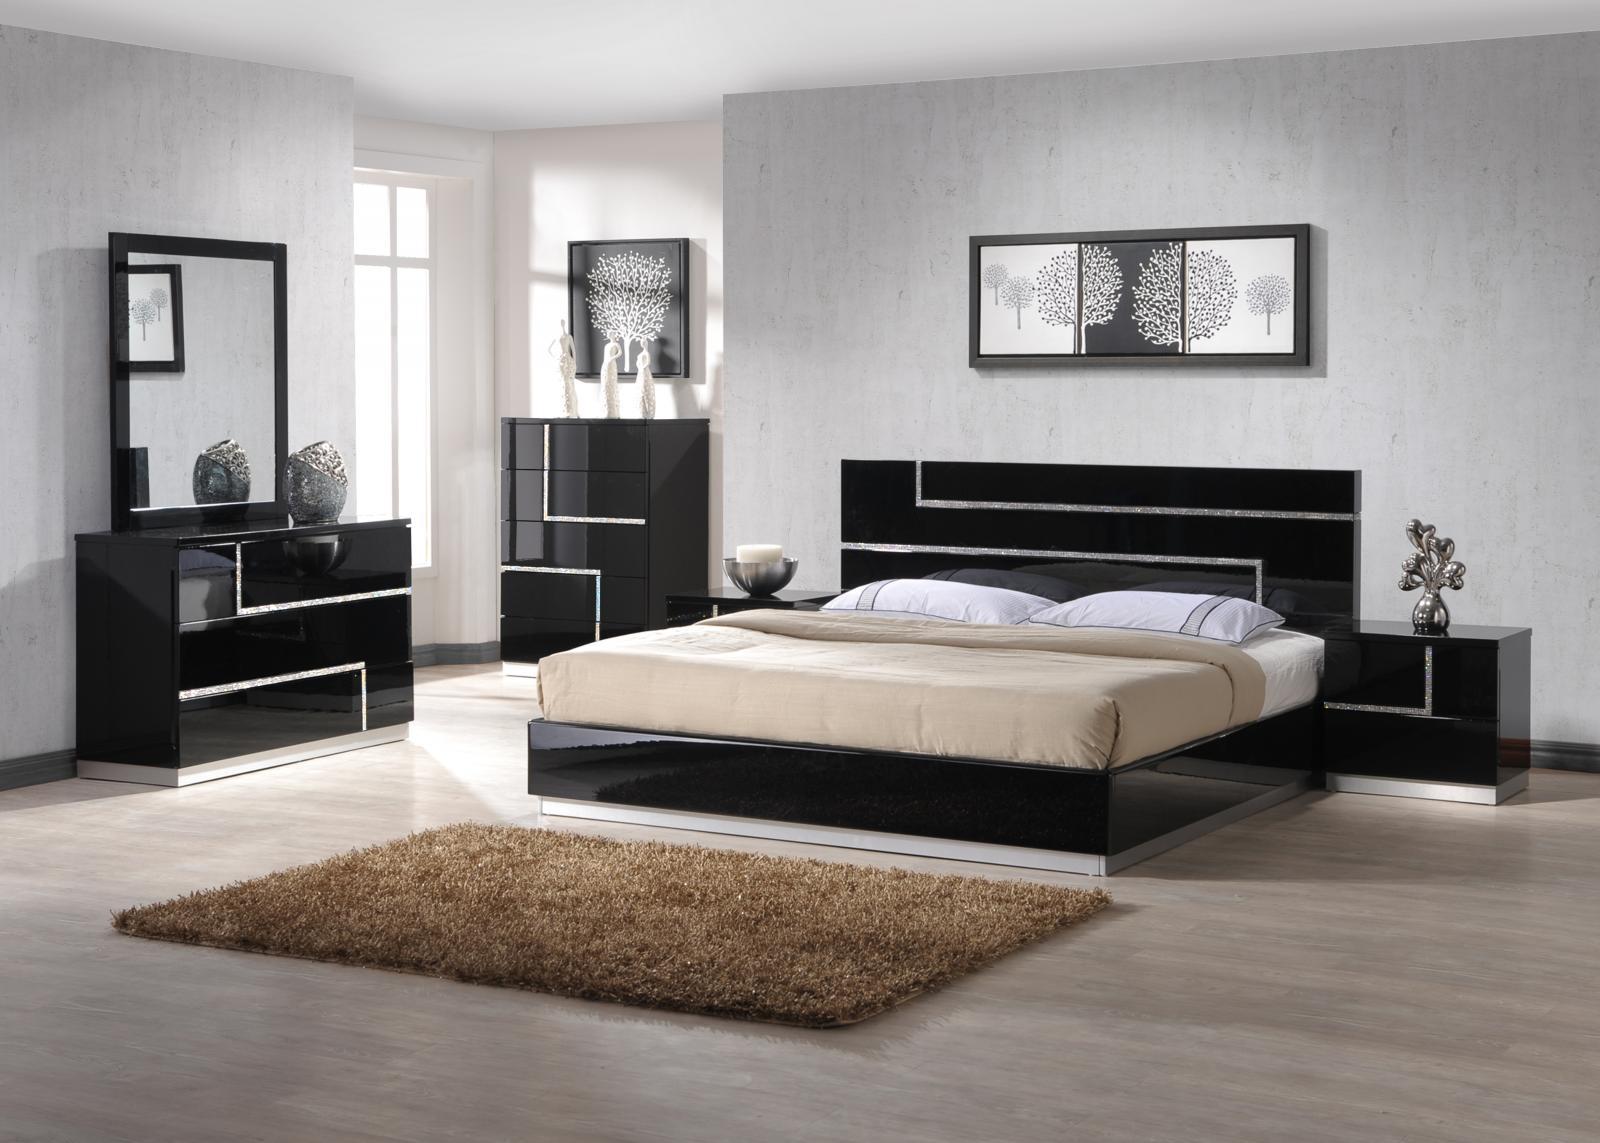 

    
J&M Lucca Luxury Black Lacquer With Crystal Accents King Bedroom Set 6Pcs
